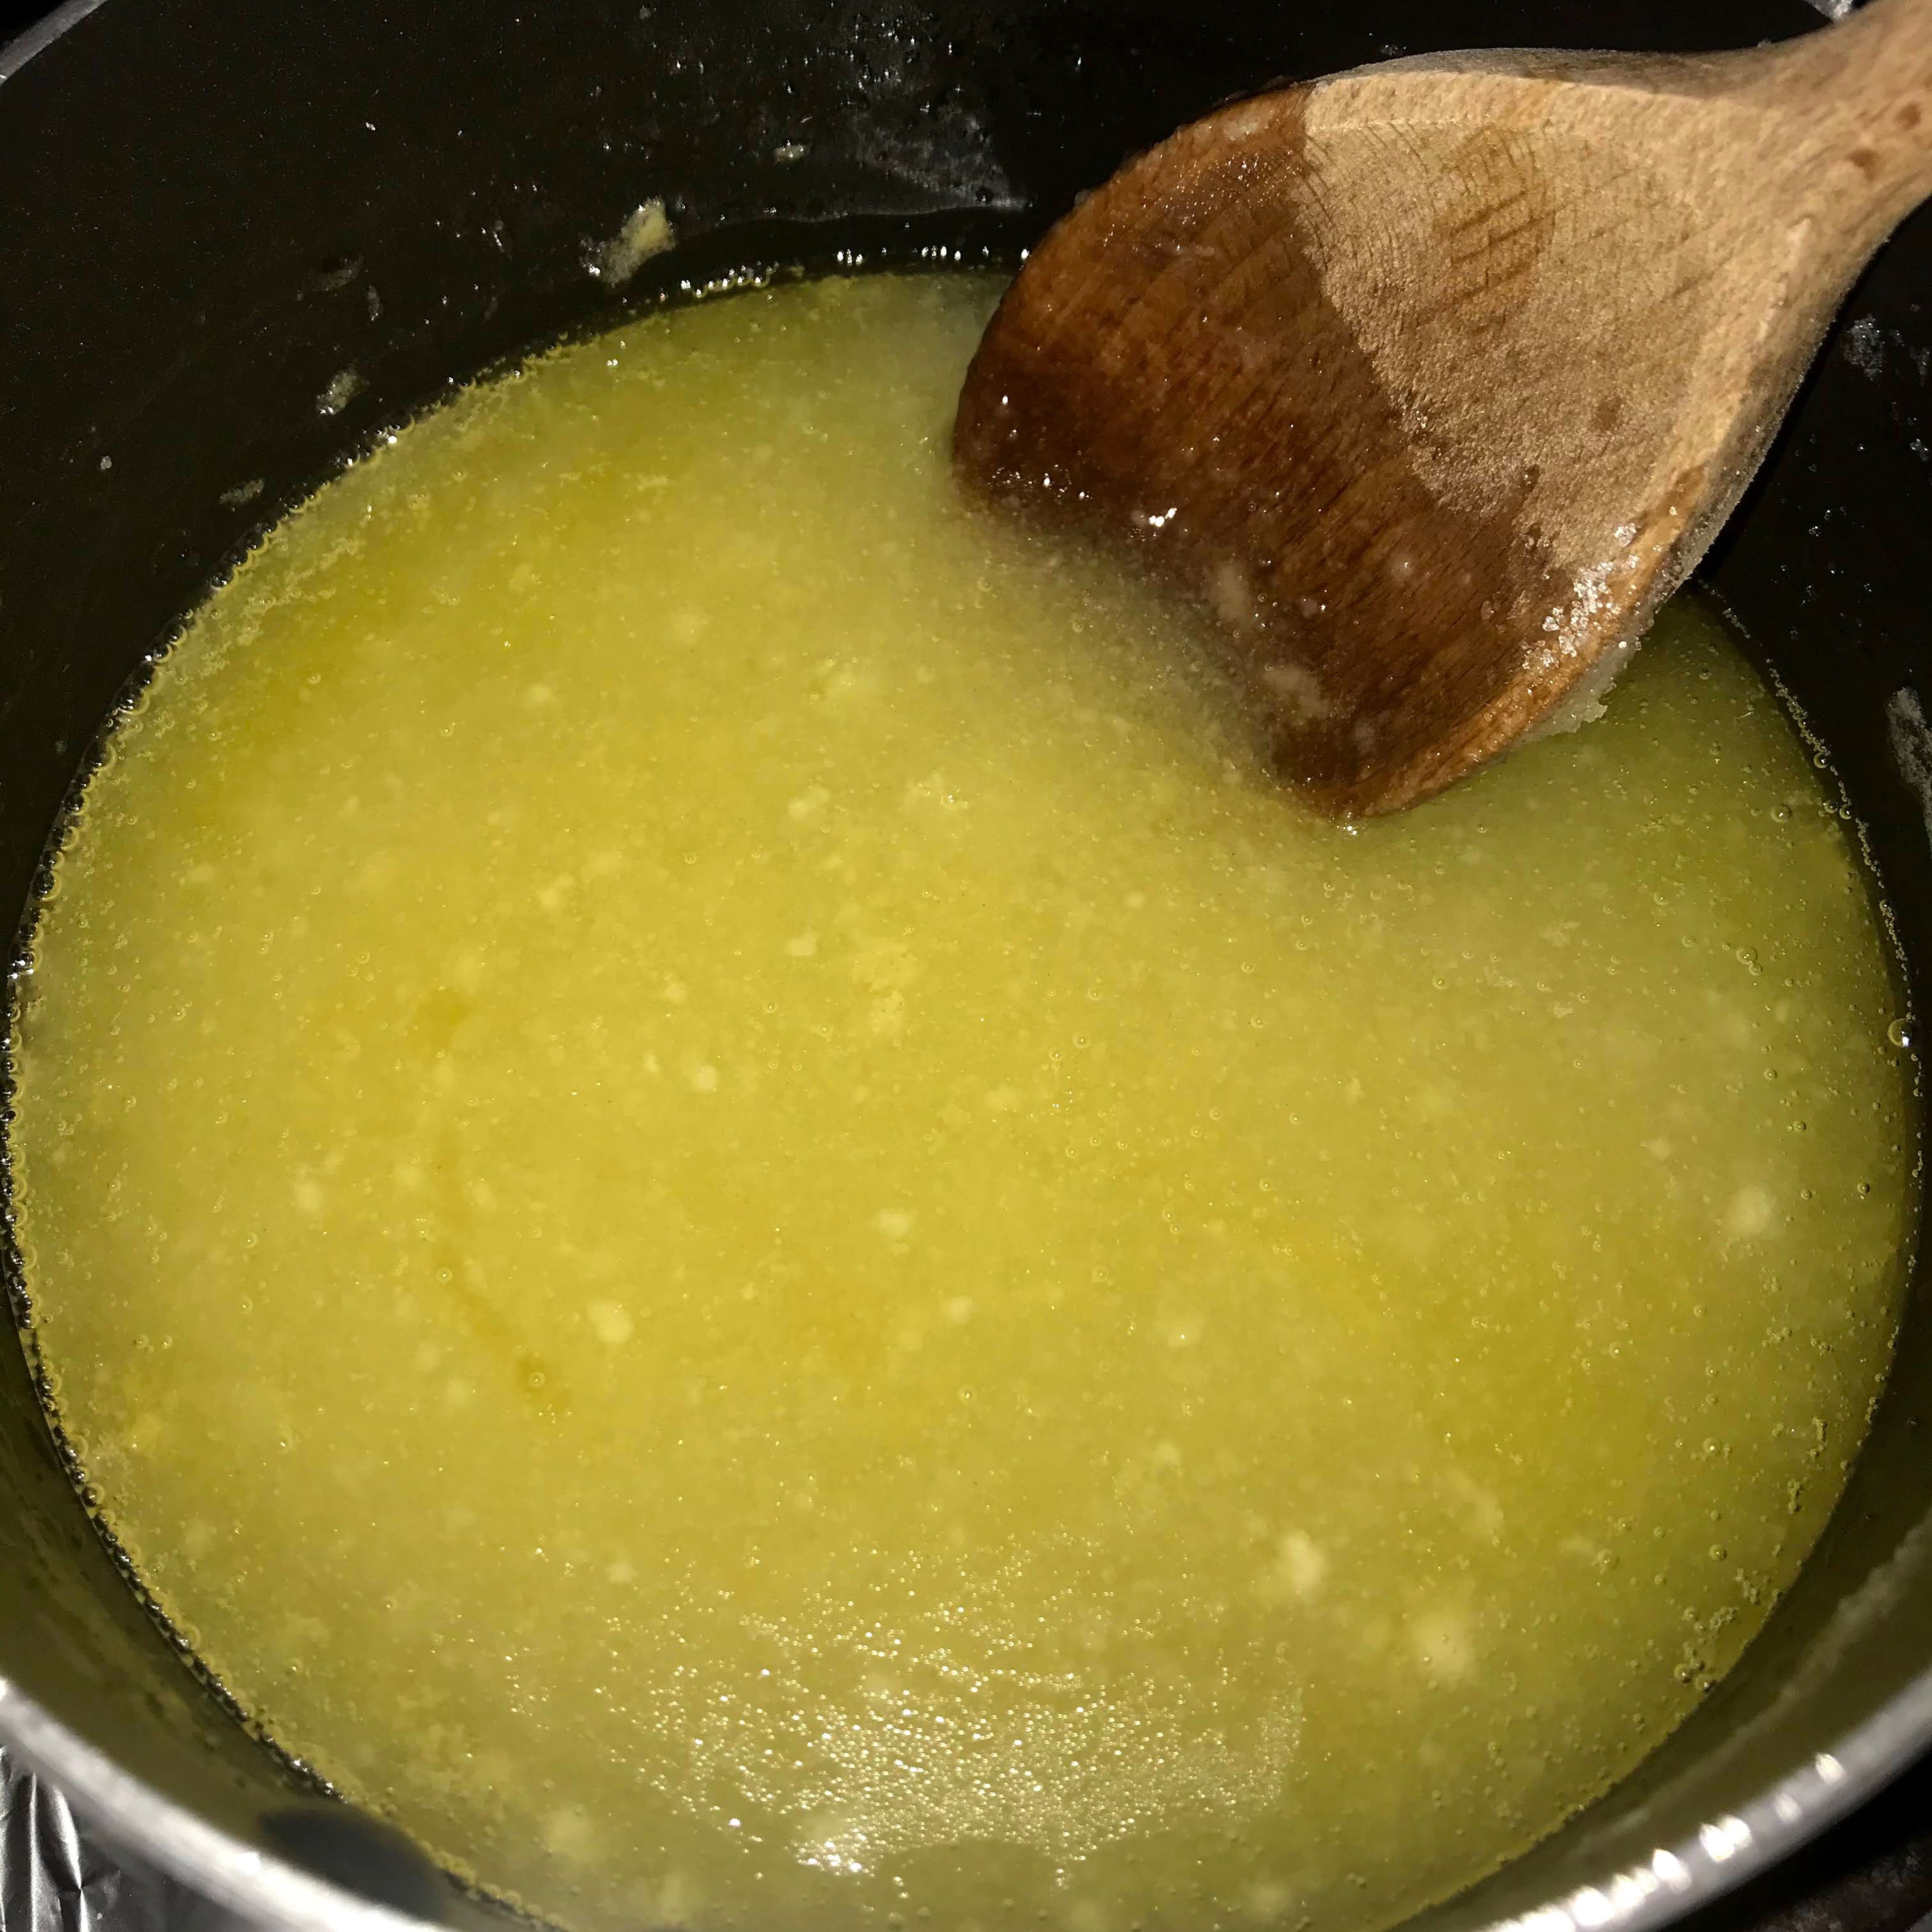 Melt the butter in a saucepan. Mix in the flour then simmer for 1 minute, mixing continuously. Mix in the water, sugar and bring to a boil. Next,reduce the heat and continue simmering for 3 more minutes, mixing regularly.